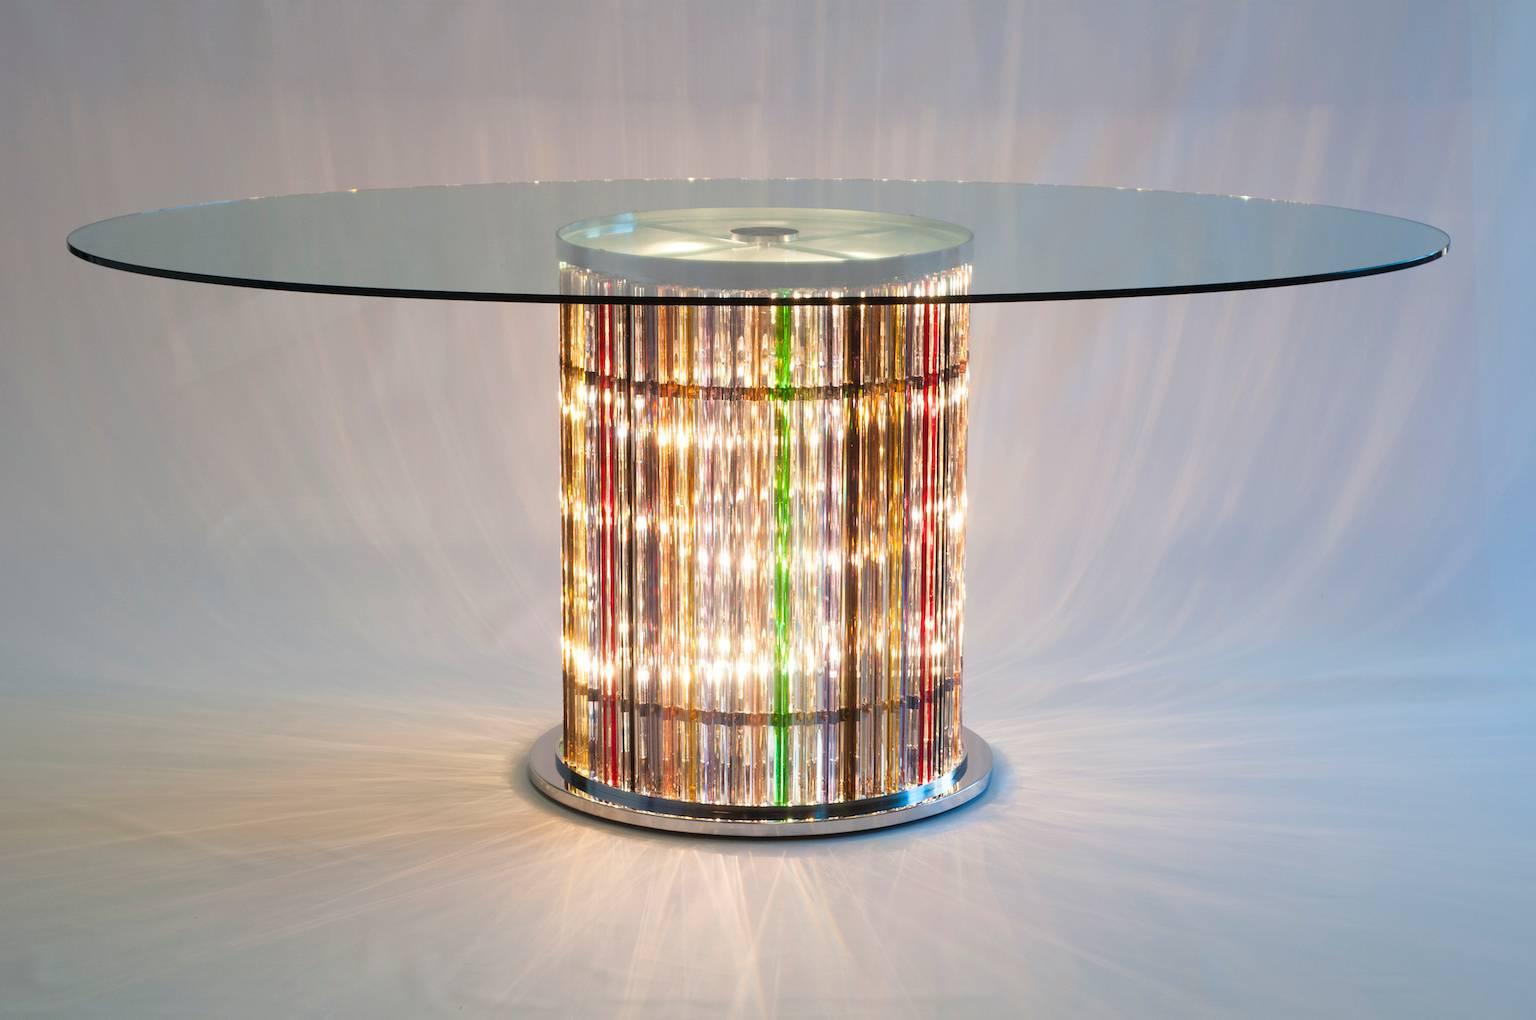 Italian Murano Dining Table with Lights in the Stem, circa 1980s 3